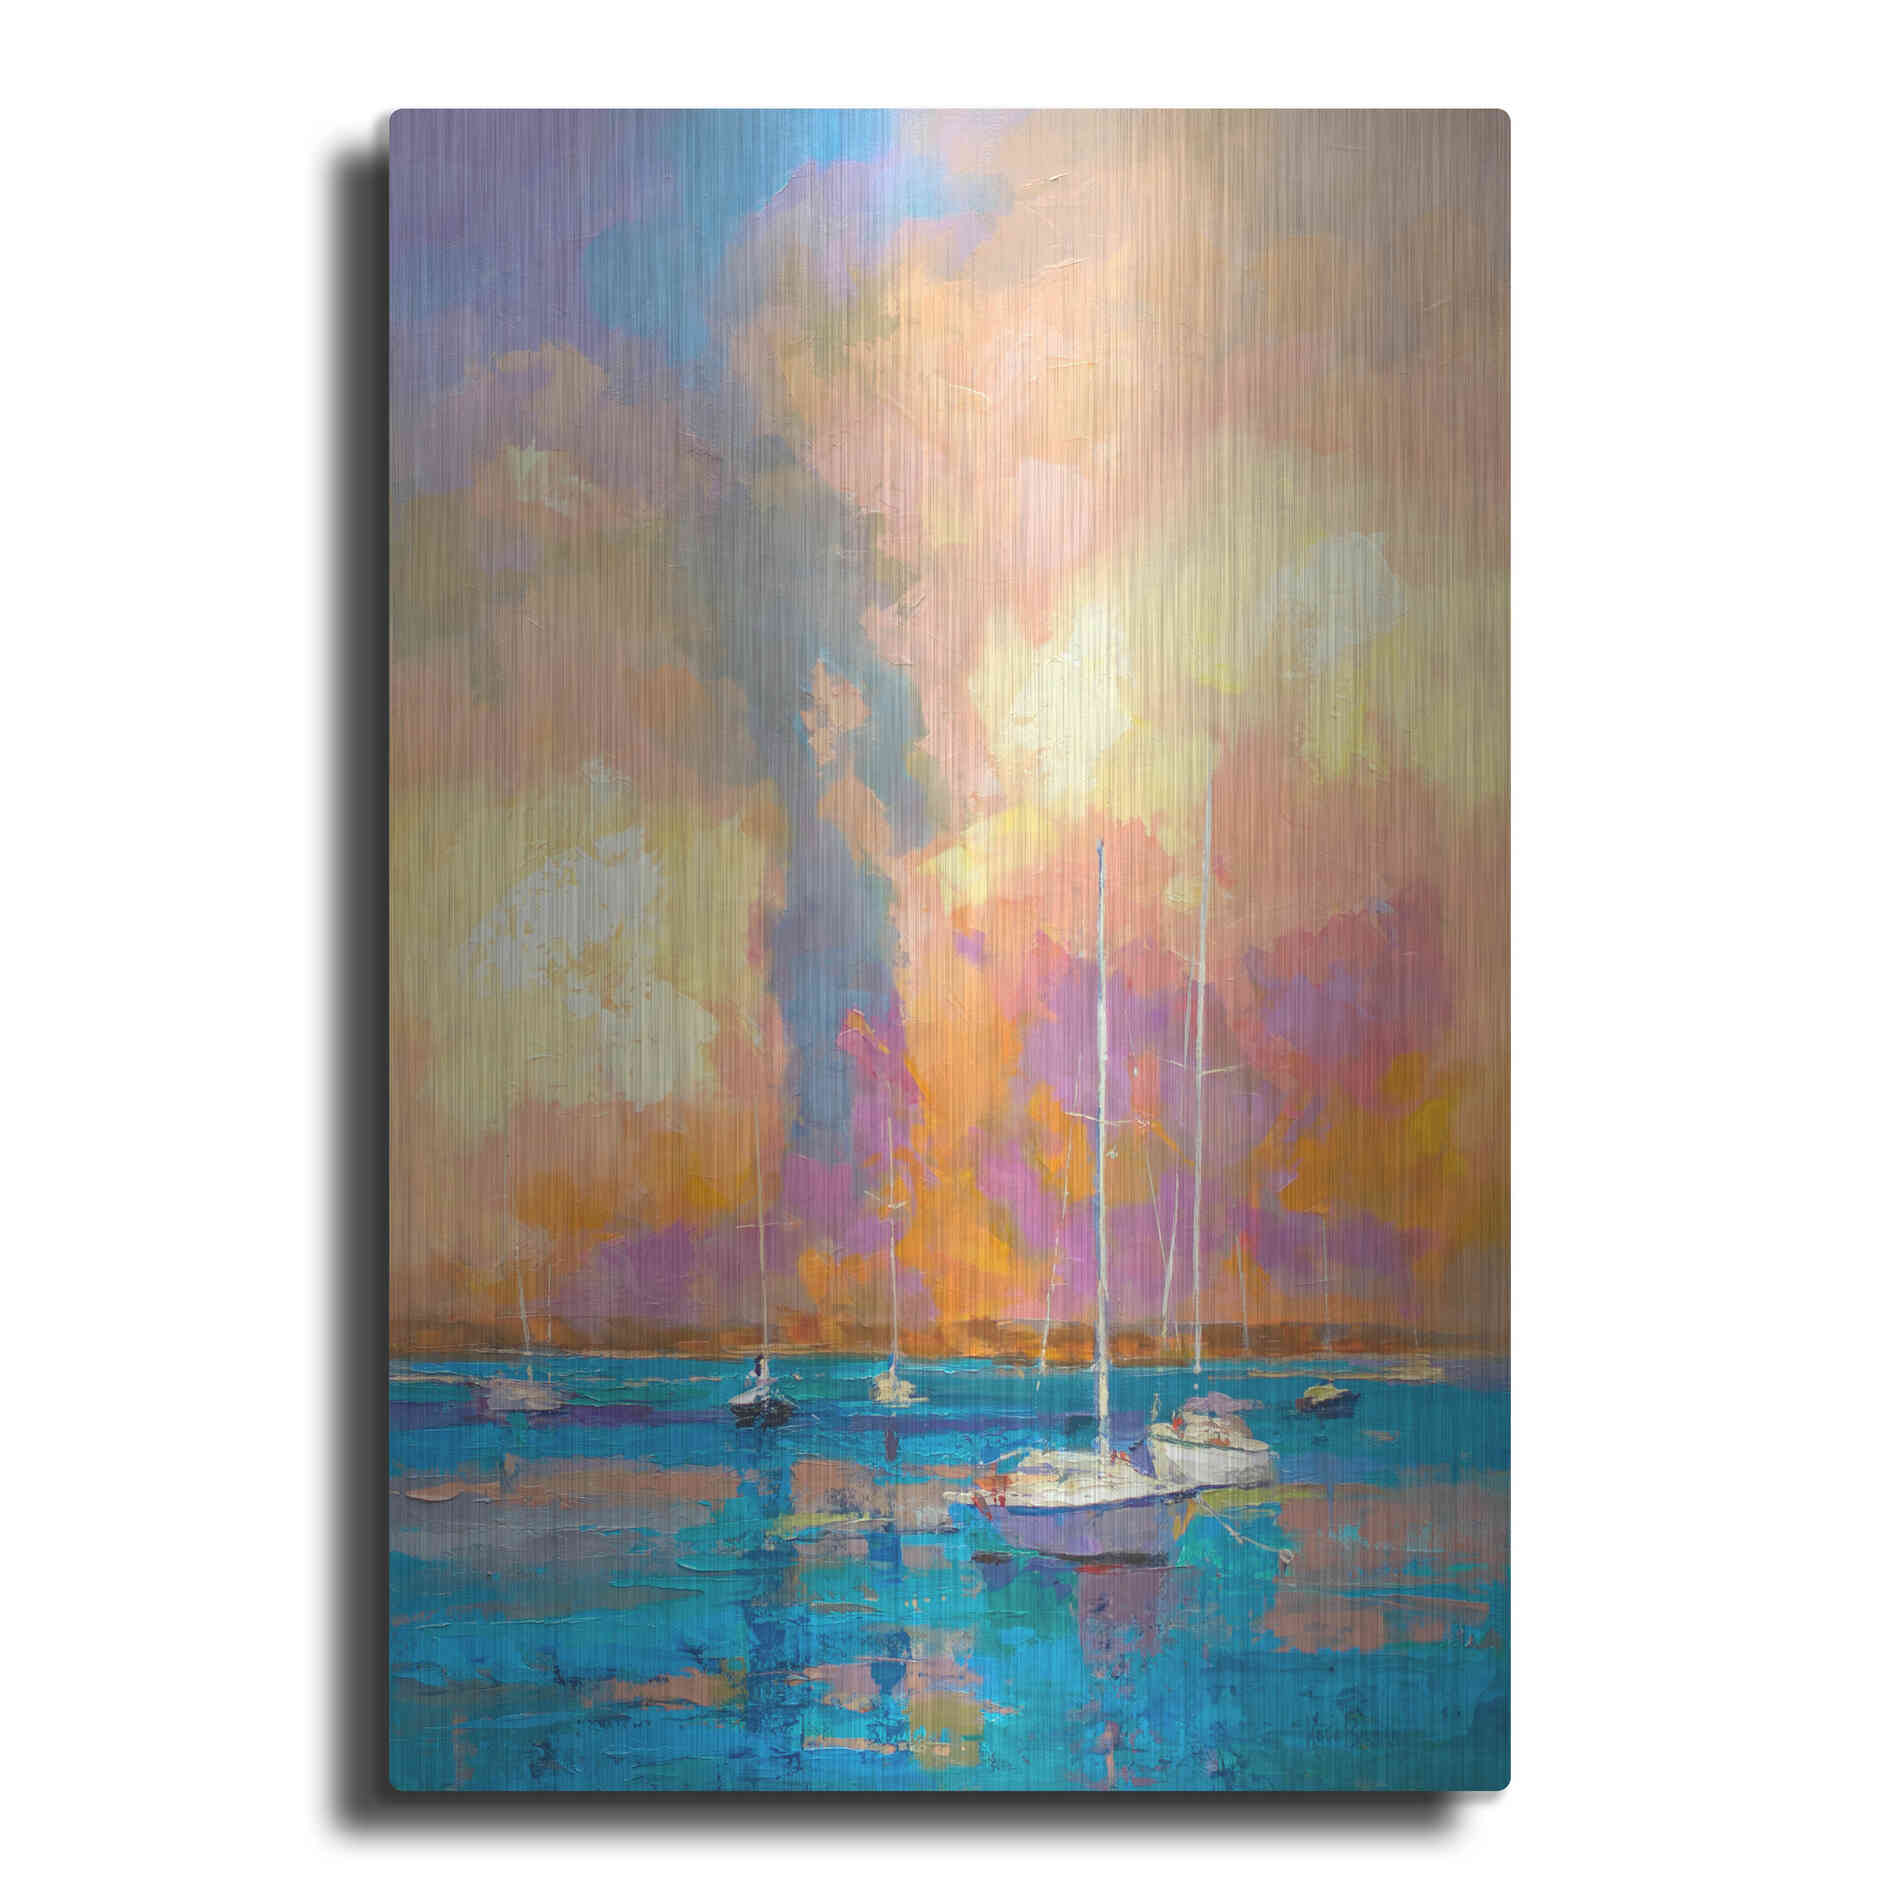 Luxe Metal Art 'Evening On The Bay' by Kasia Bruniany Metal Wall Art